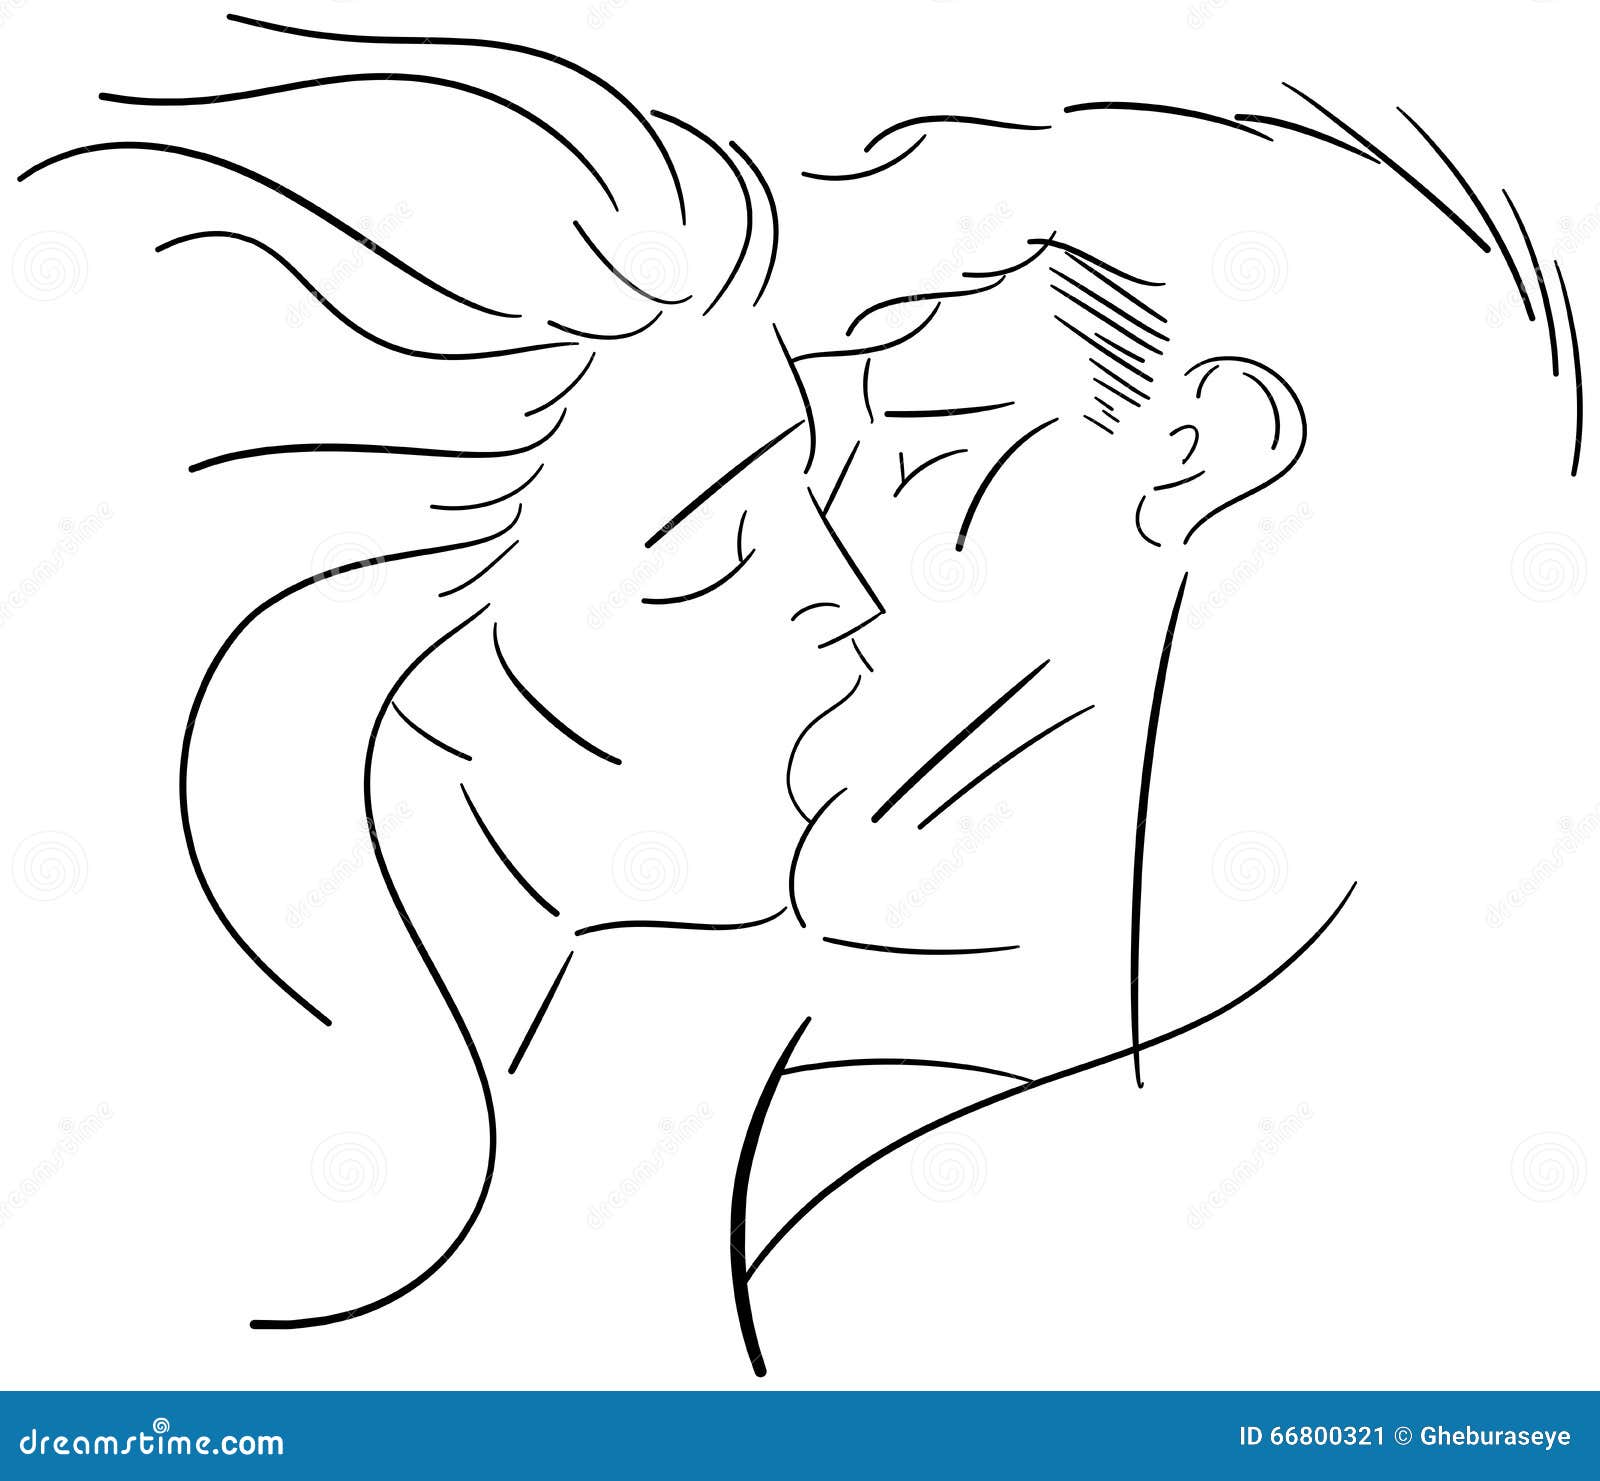 Passionate Kiss Isolated in Black and White Stock Vector - Illustration ...